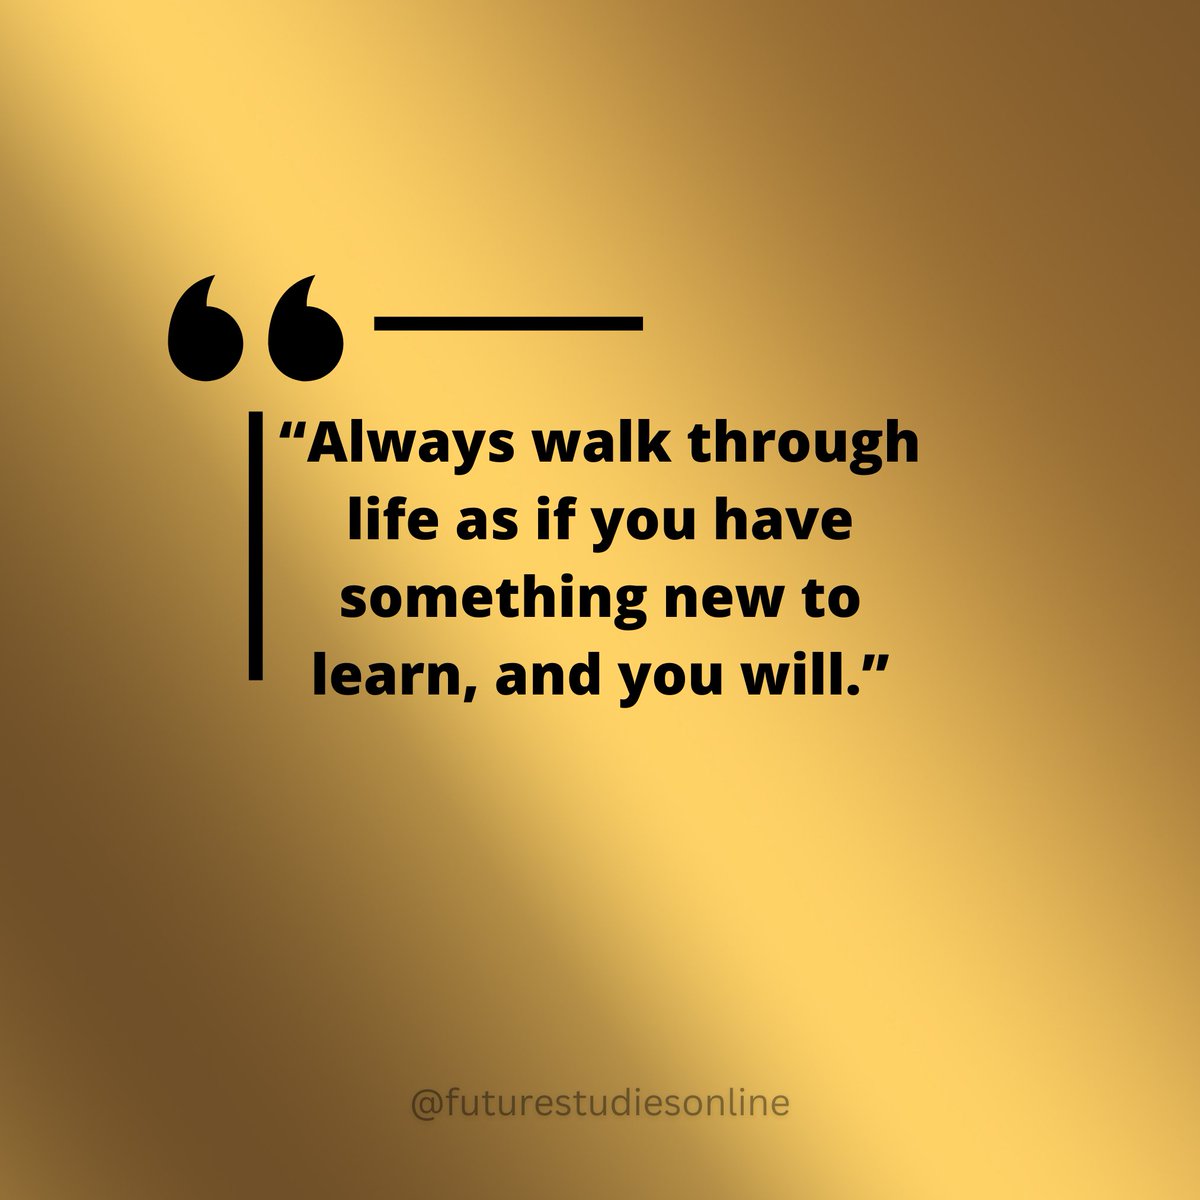 “Always walk through life as if you have something new to learn, and you will.”